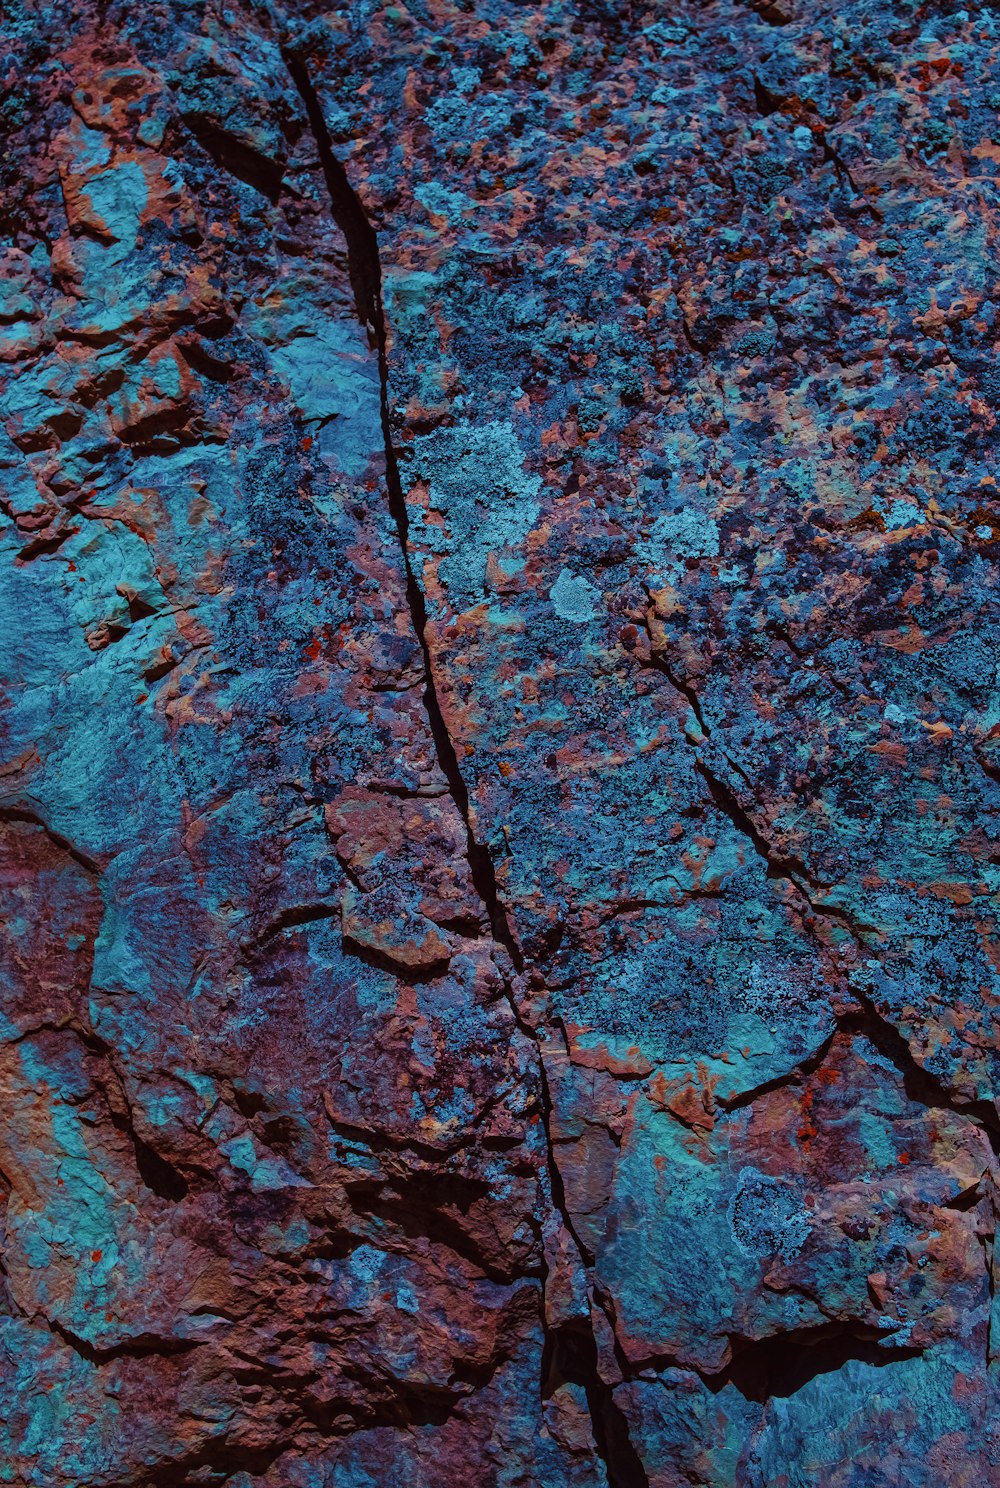 a close up of a rock with a blue and red substance on it